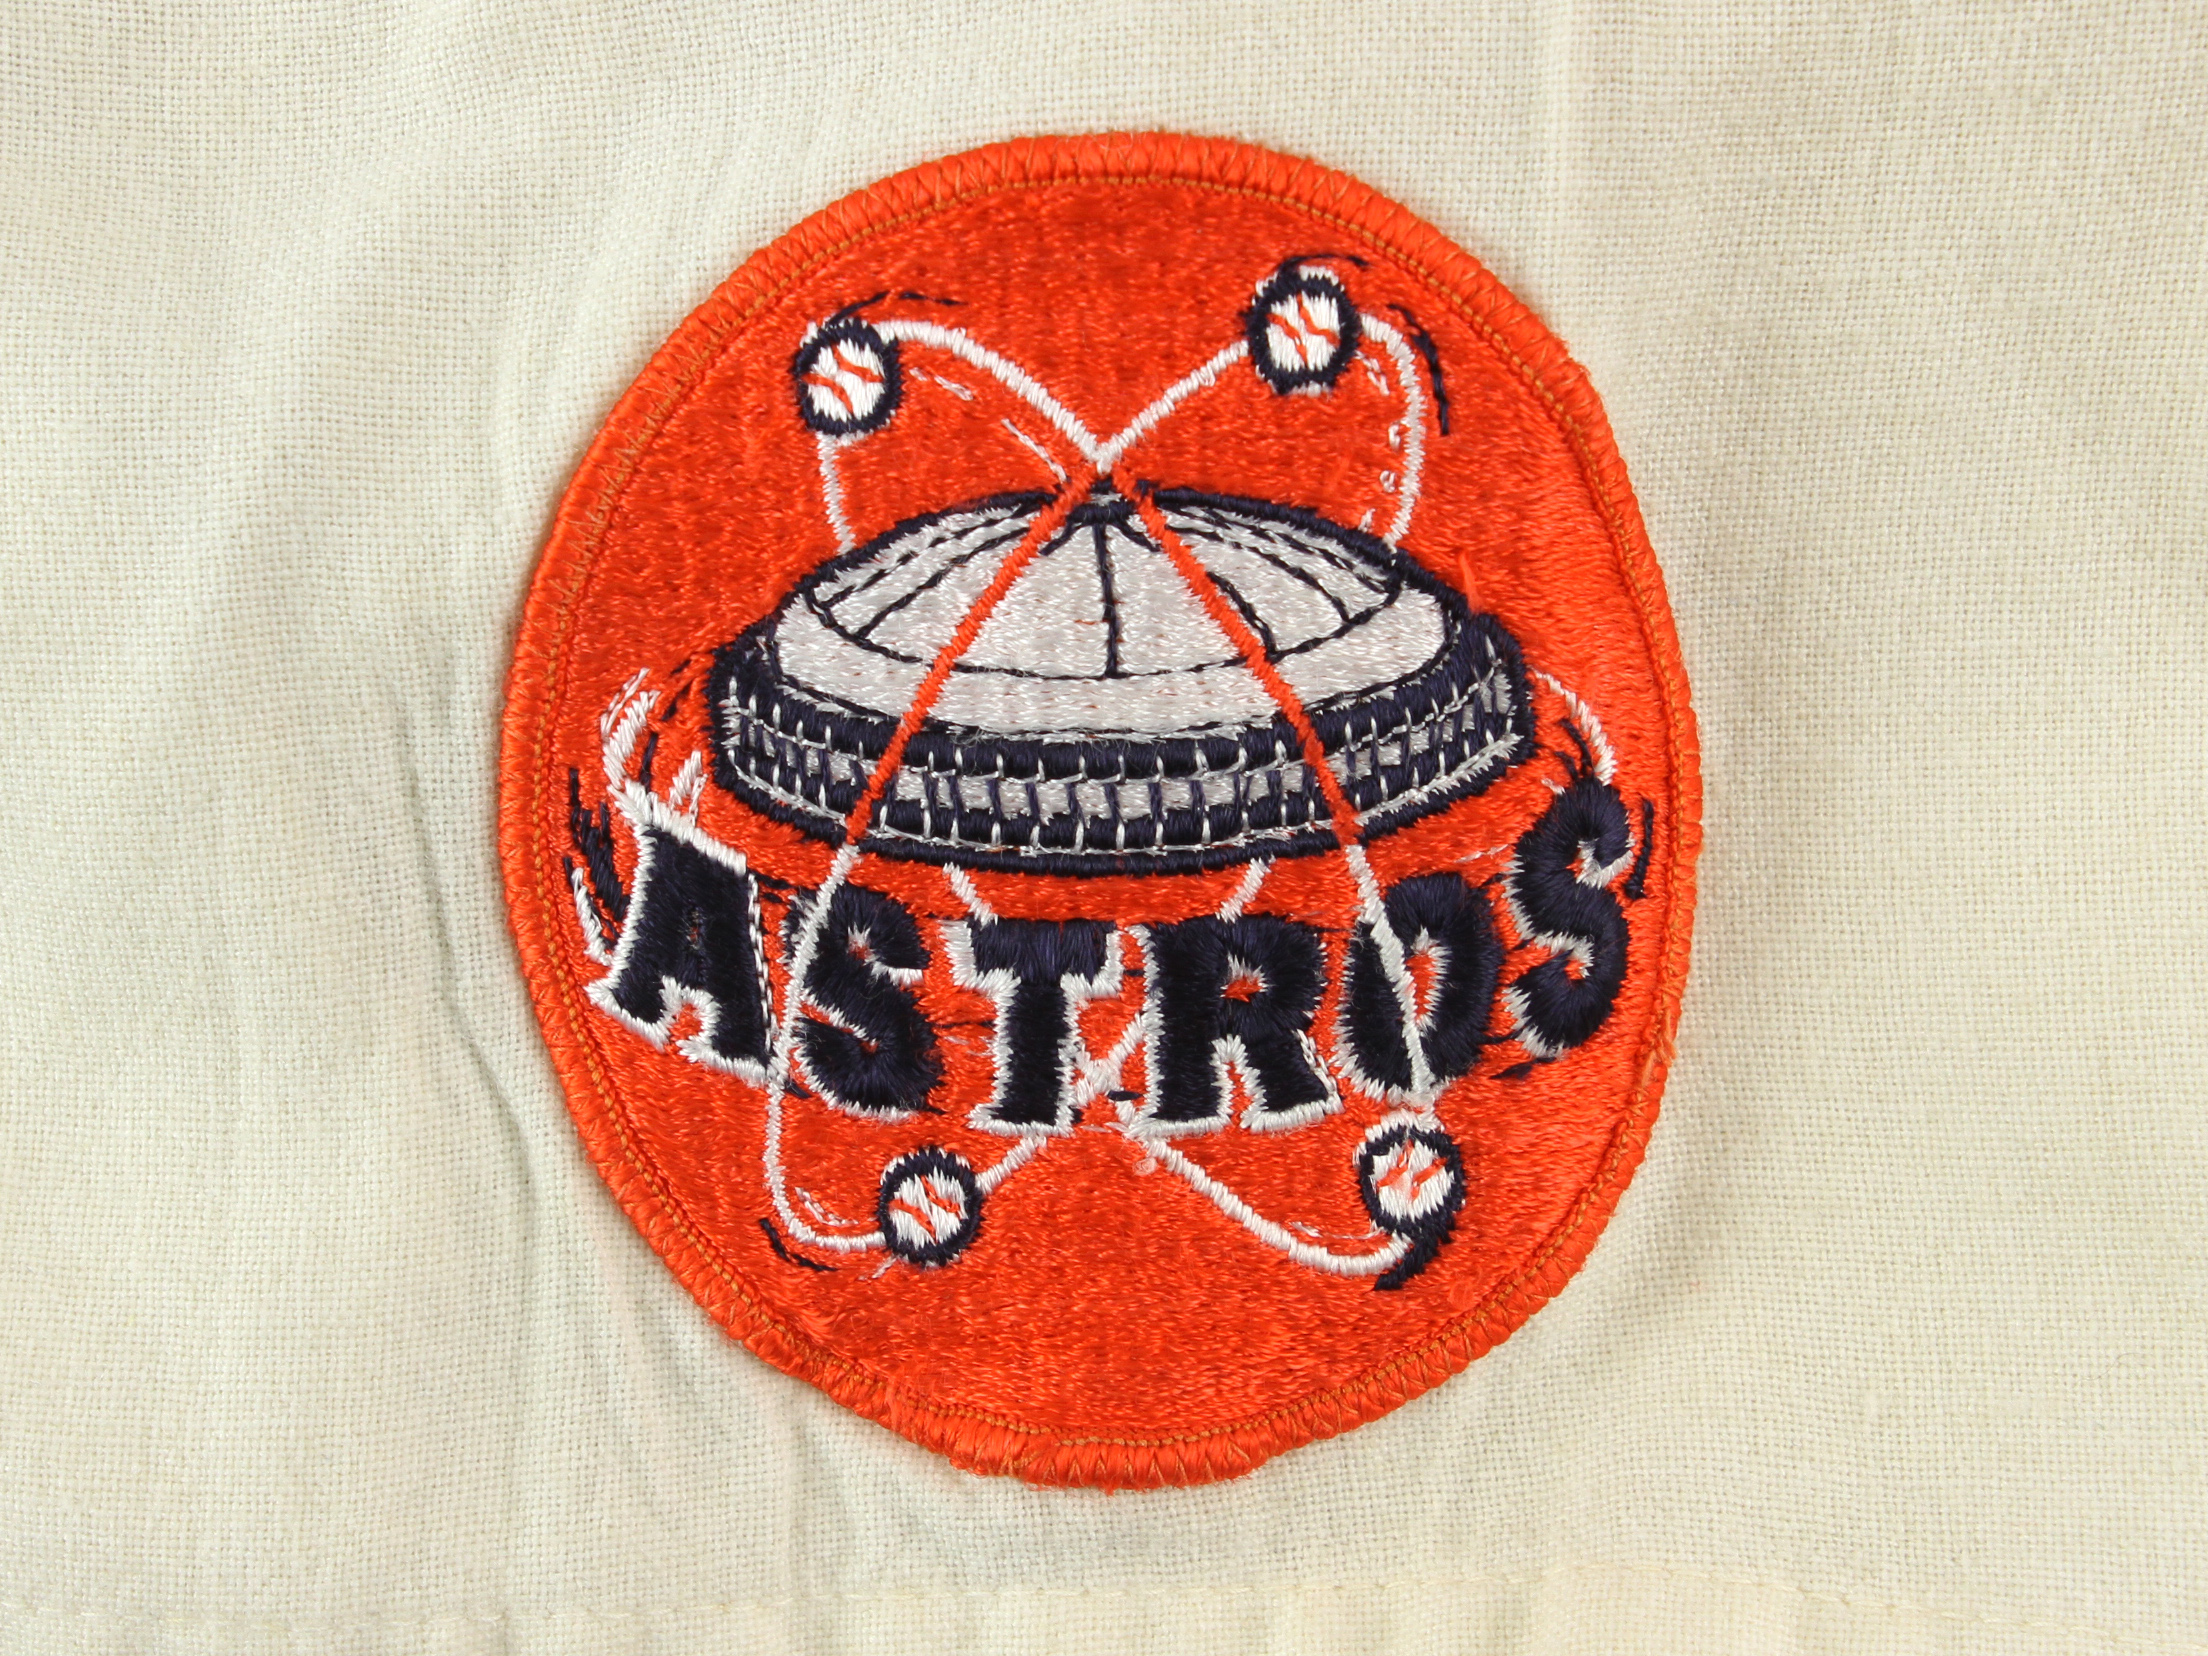 Don Wilson Houston Astros 1960S Cooperstown Unsigned Jersey -  Singapore